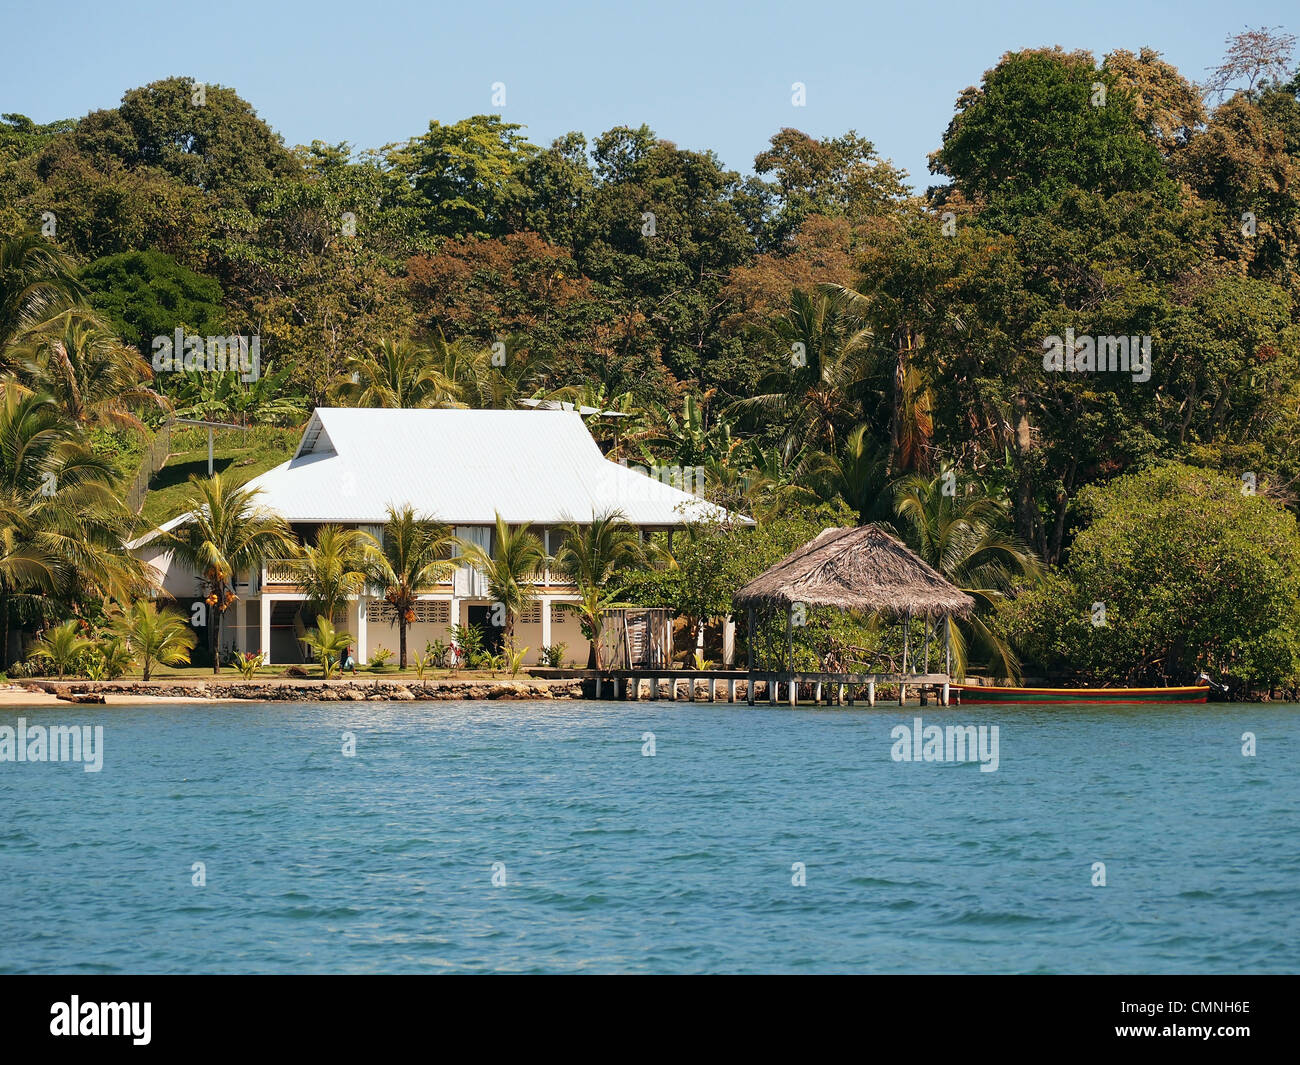 Waterfront tropical house on the shore with palm trees and a palapa over the sea, Central America, Panama Stock Photo